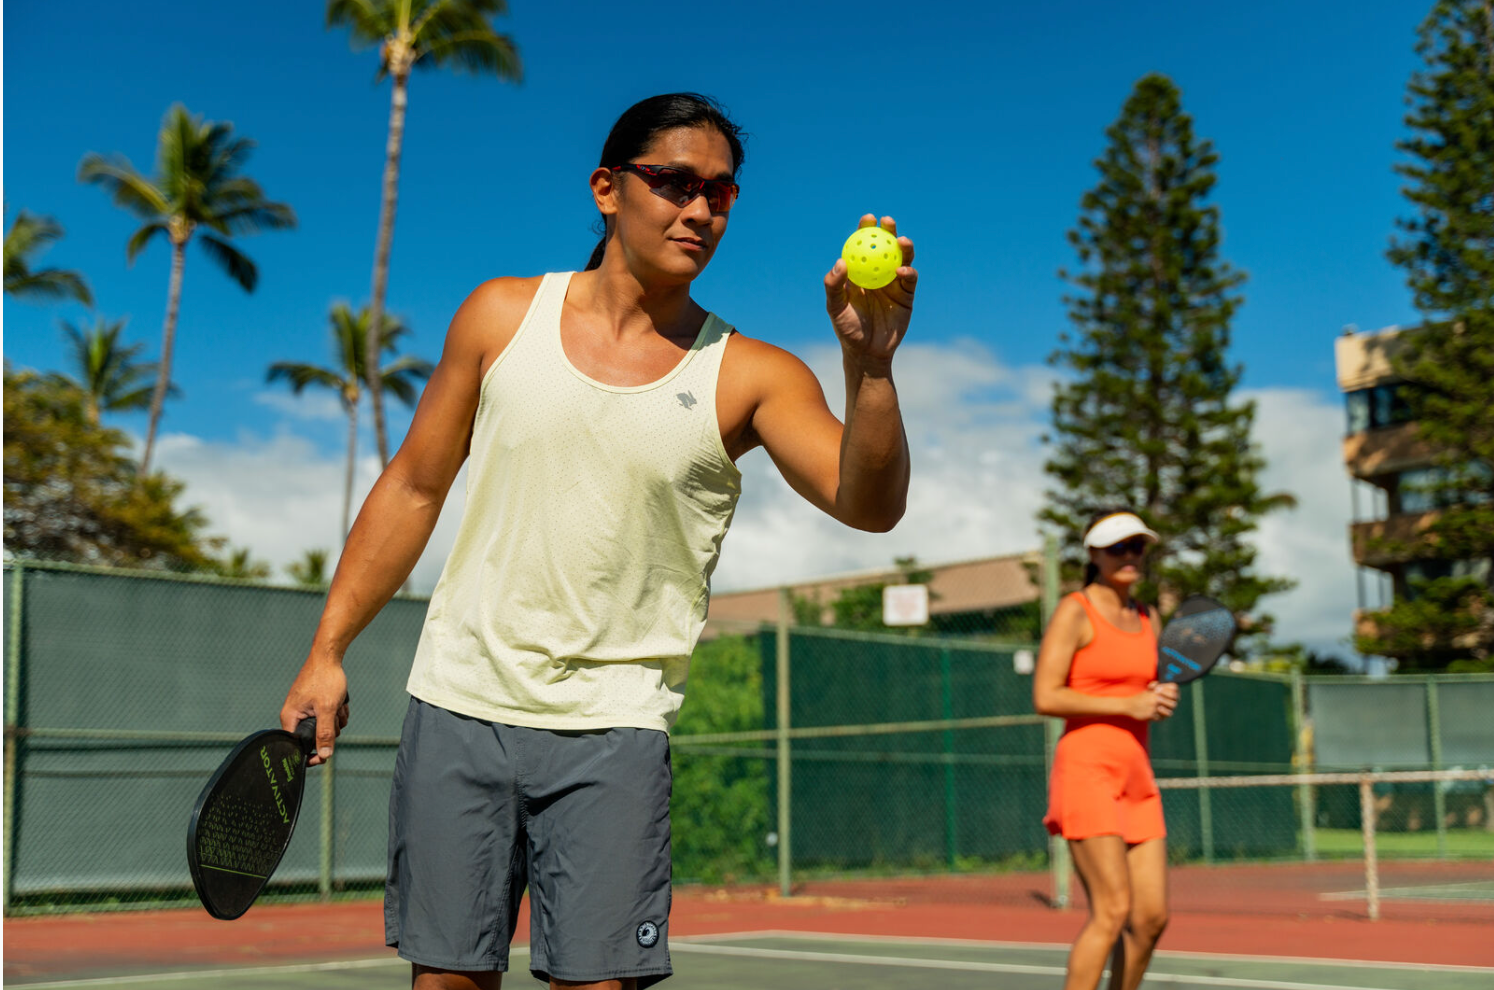 How To Choose The Best Sunglasses For Pickleball